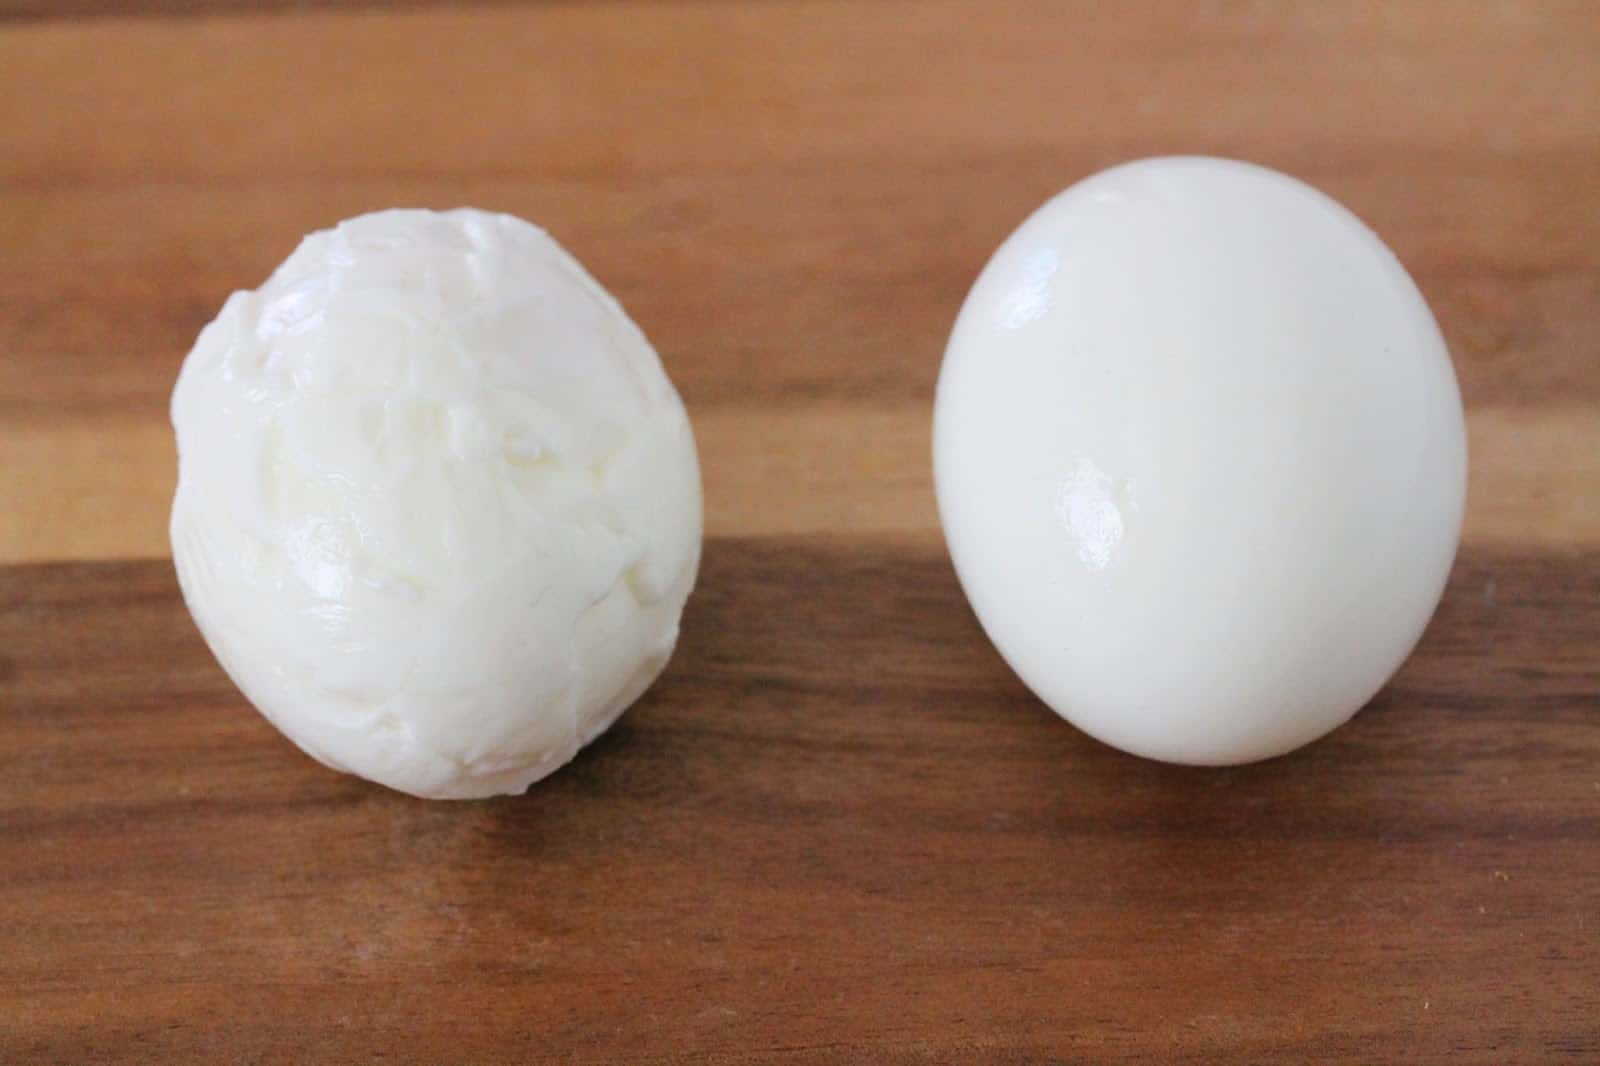 How to Boil Eggs: peeled eggs smooth vs lumpy